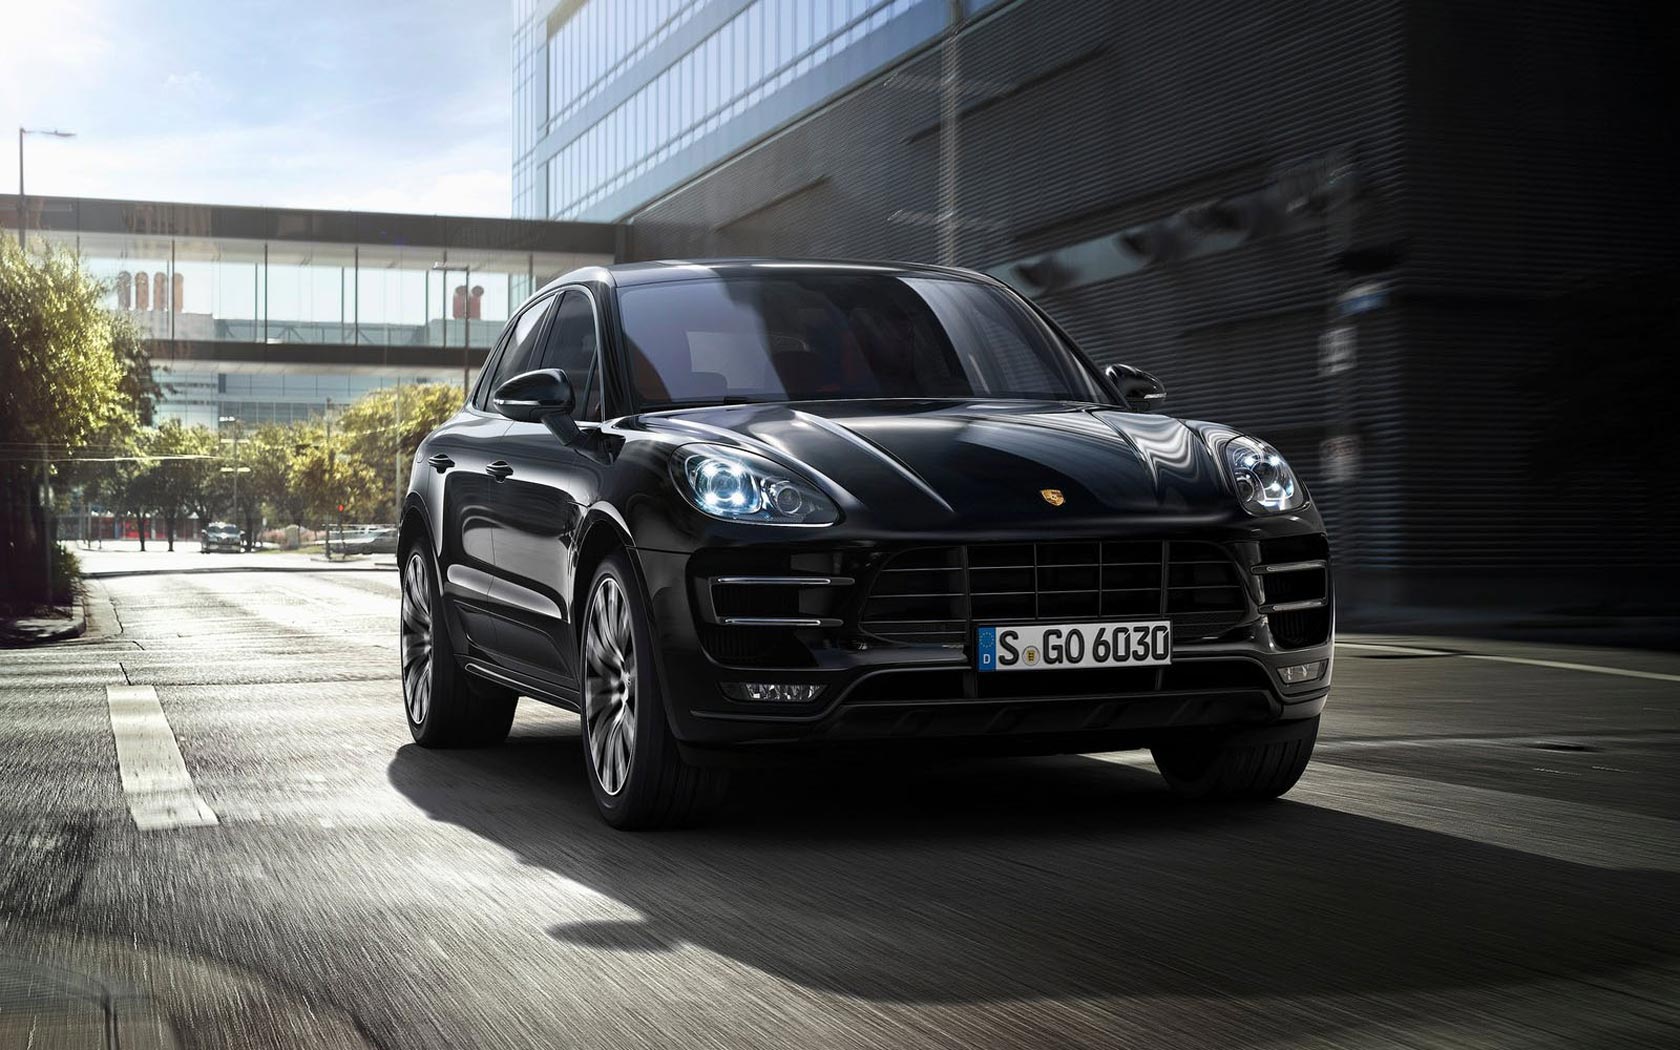 4 game macan. Порше Кайен Macan. Порше Макан и Порше Кайен. Порше Кайен турбо. Porsche Macan Turbo.